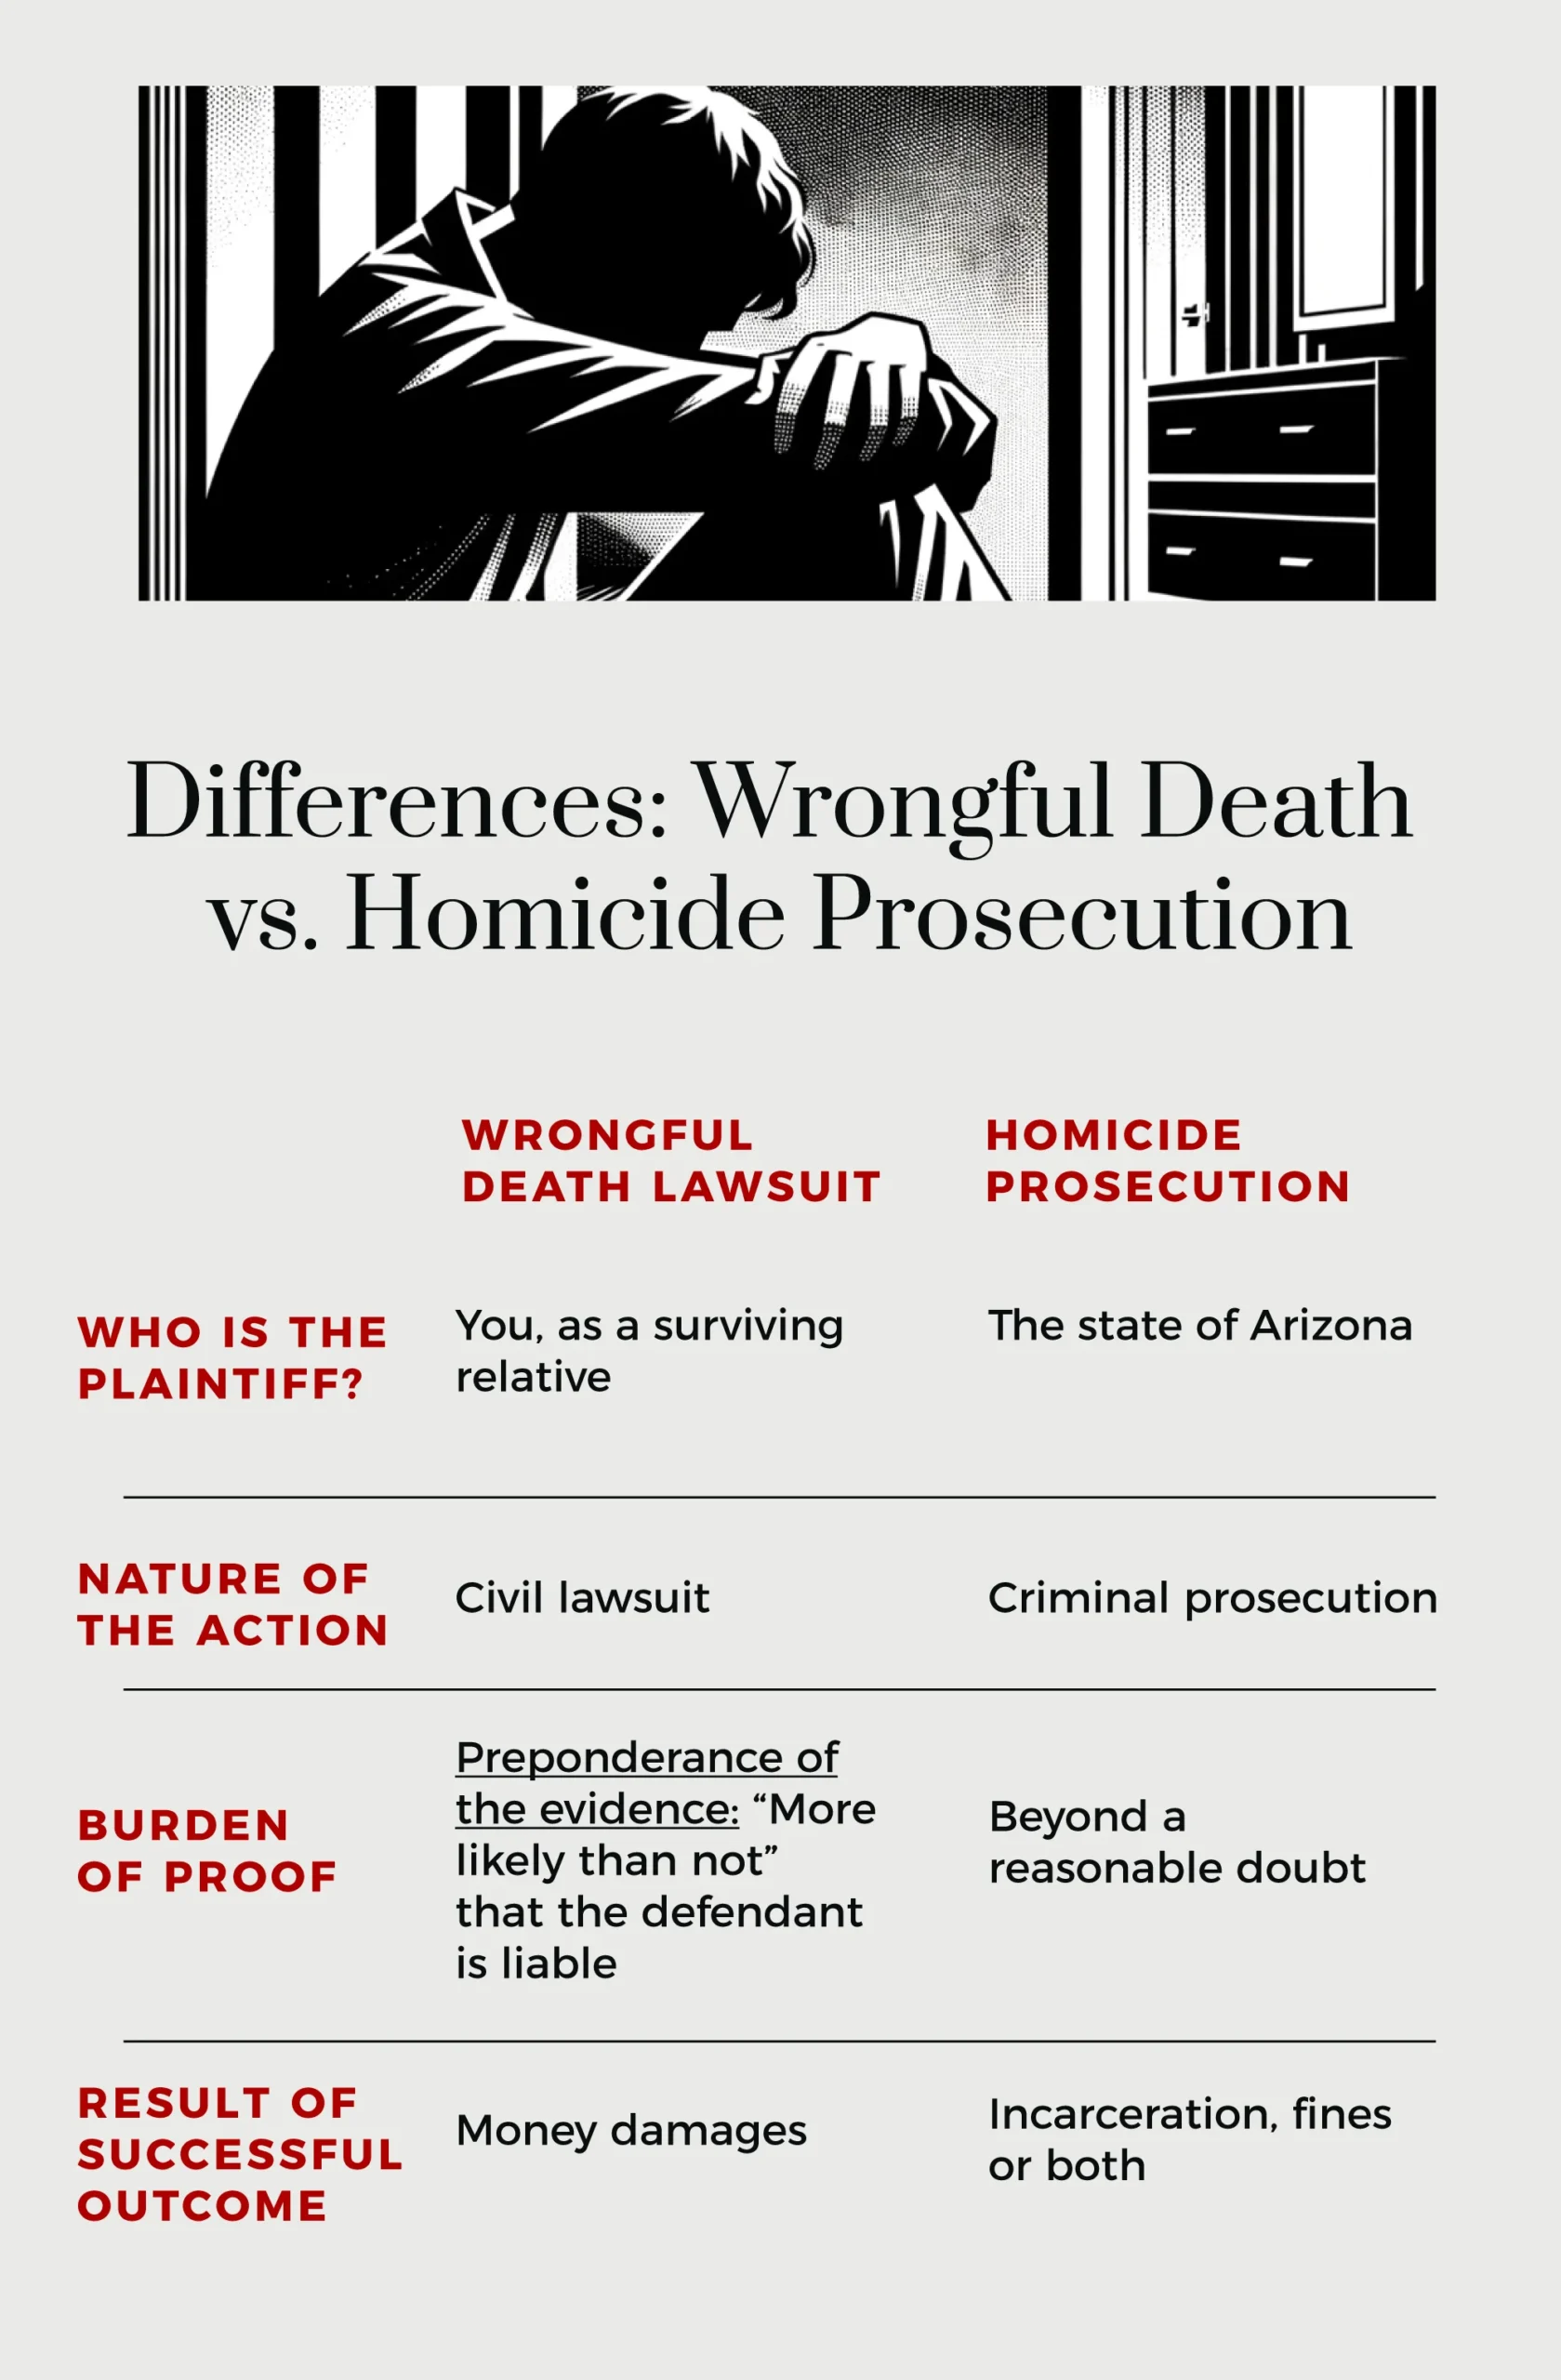 Differences between wrongful death versus homicide prosecution